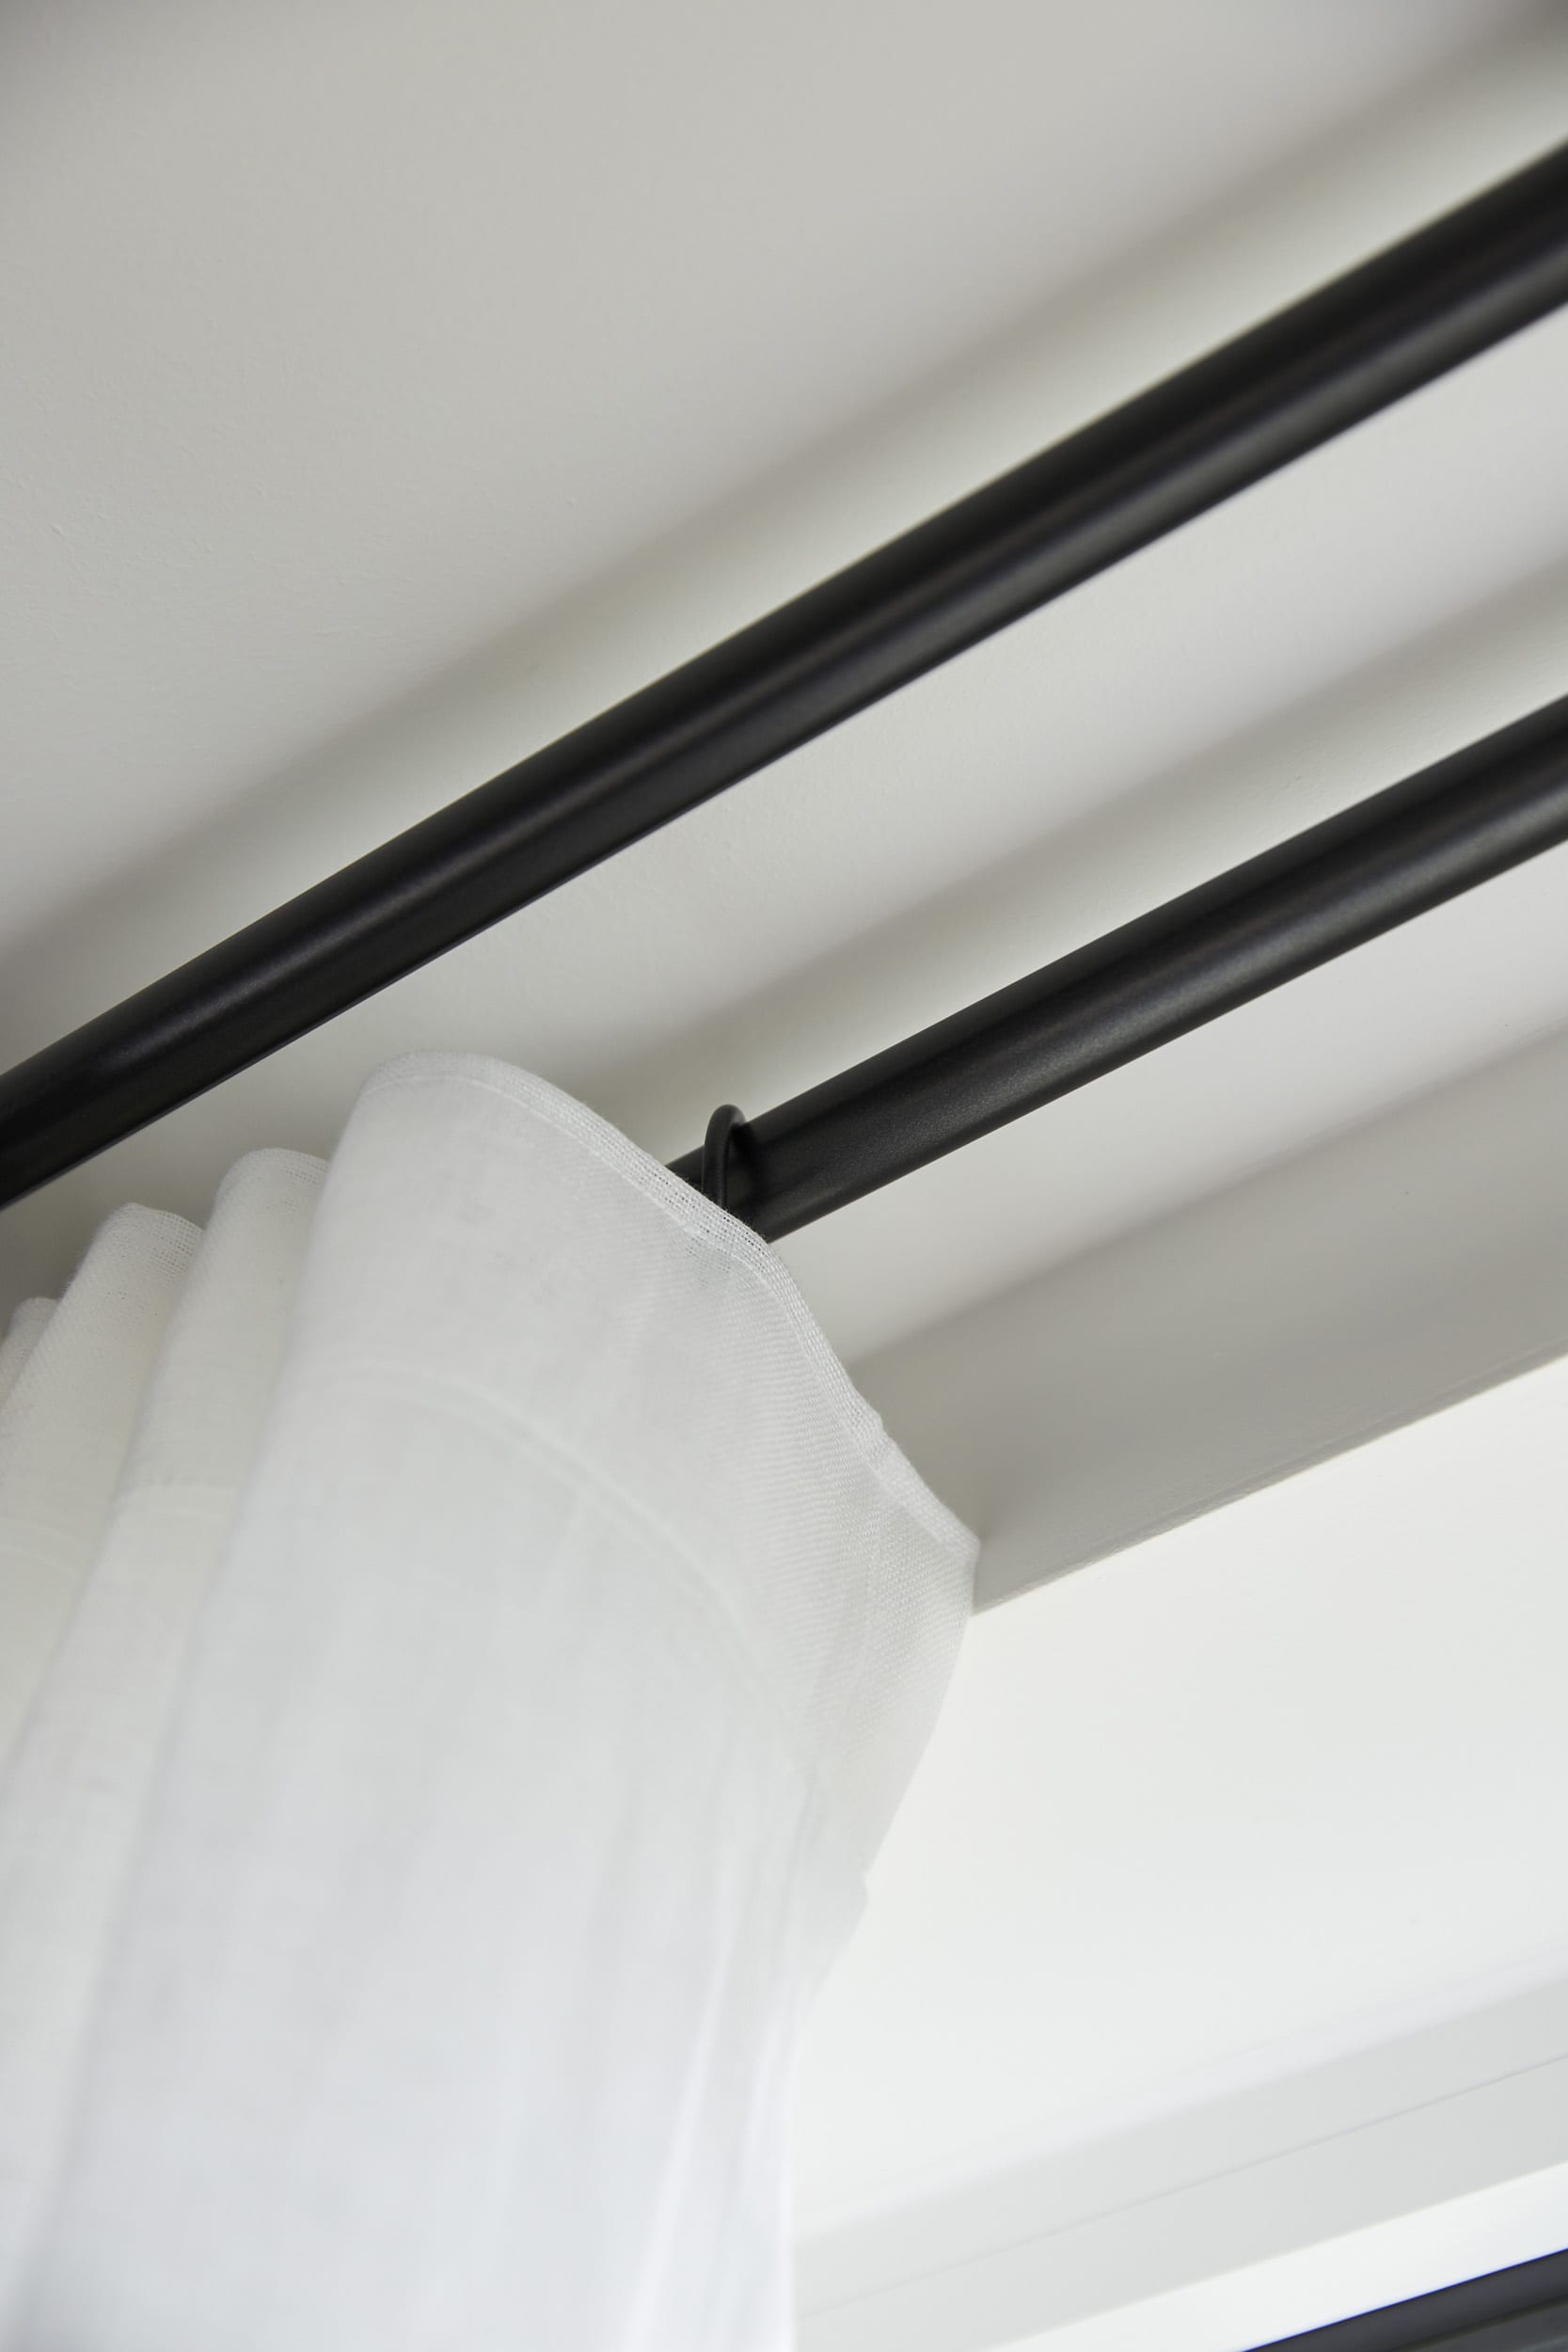 Stitched | Curtain Tracks Vs Curtain Poles: The Pros And Cons